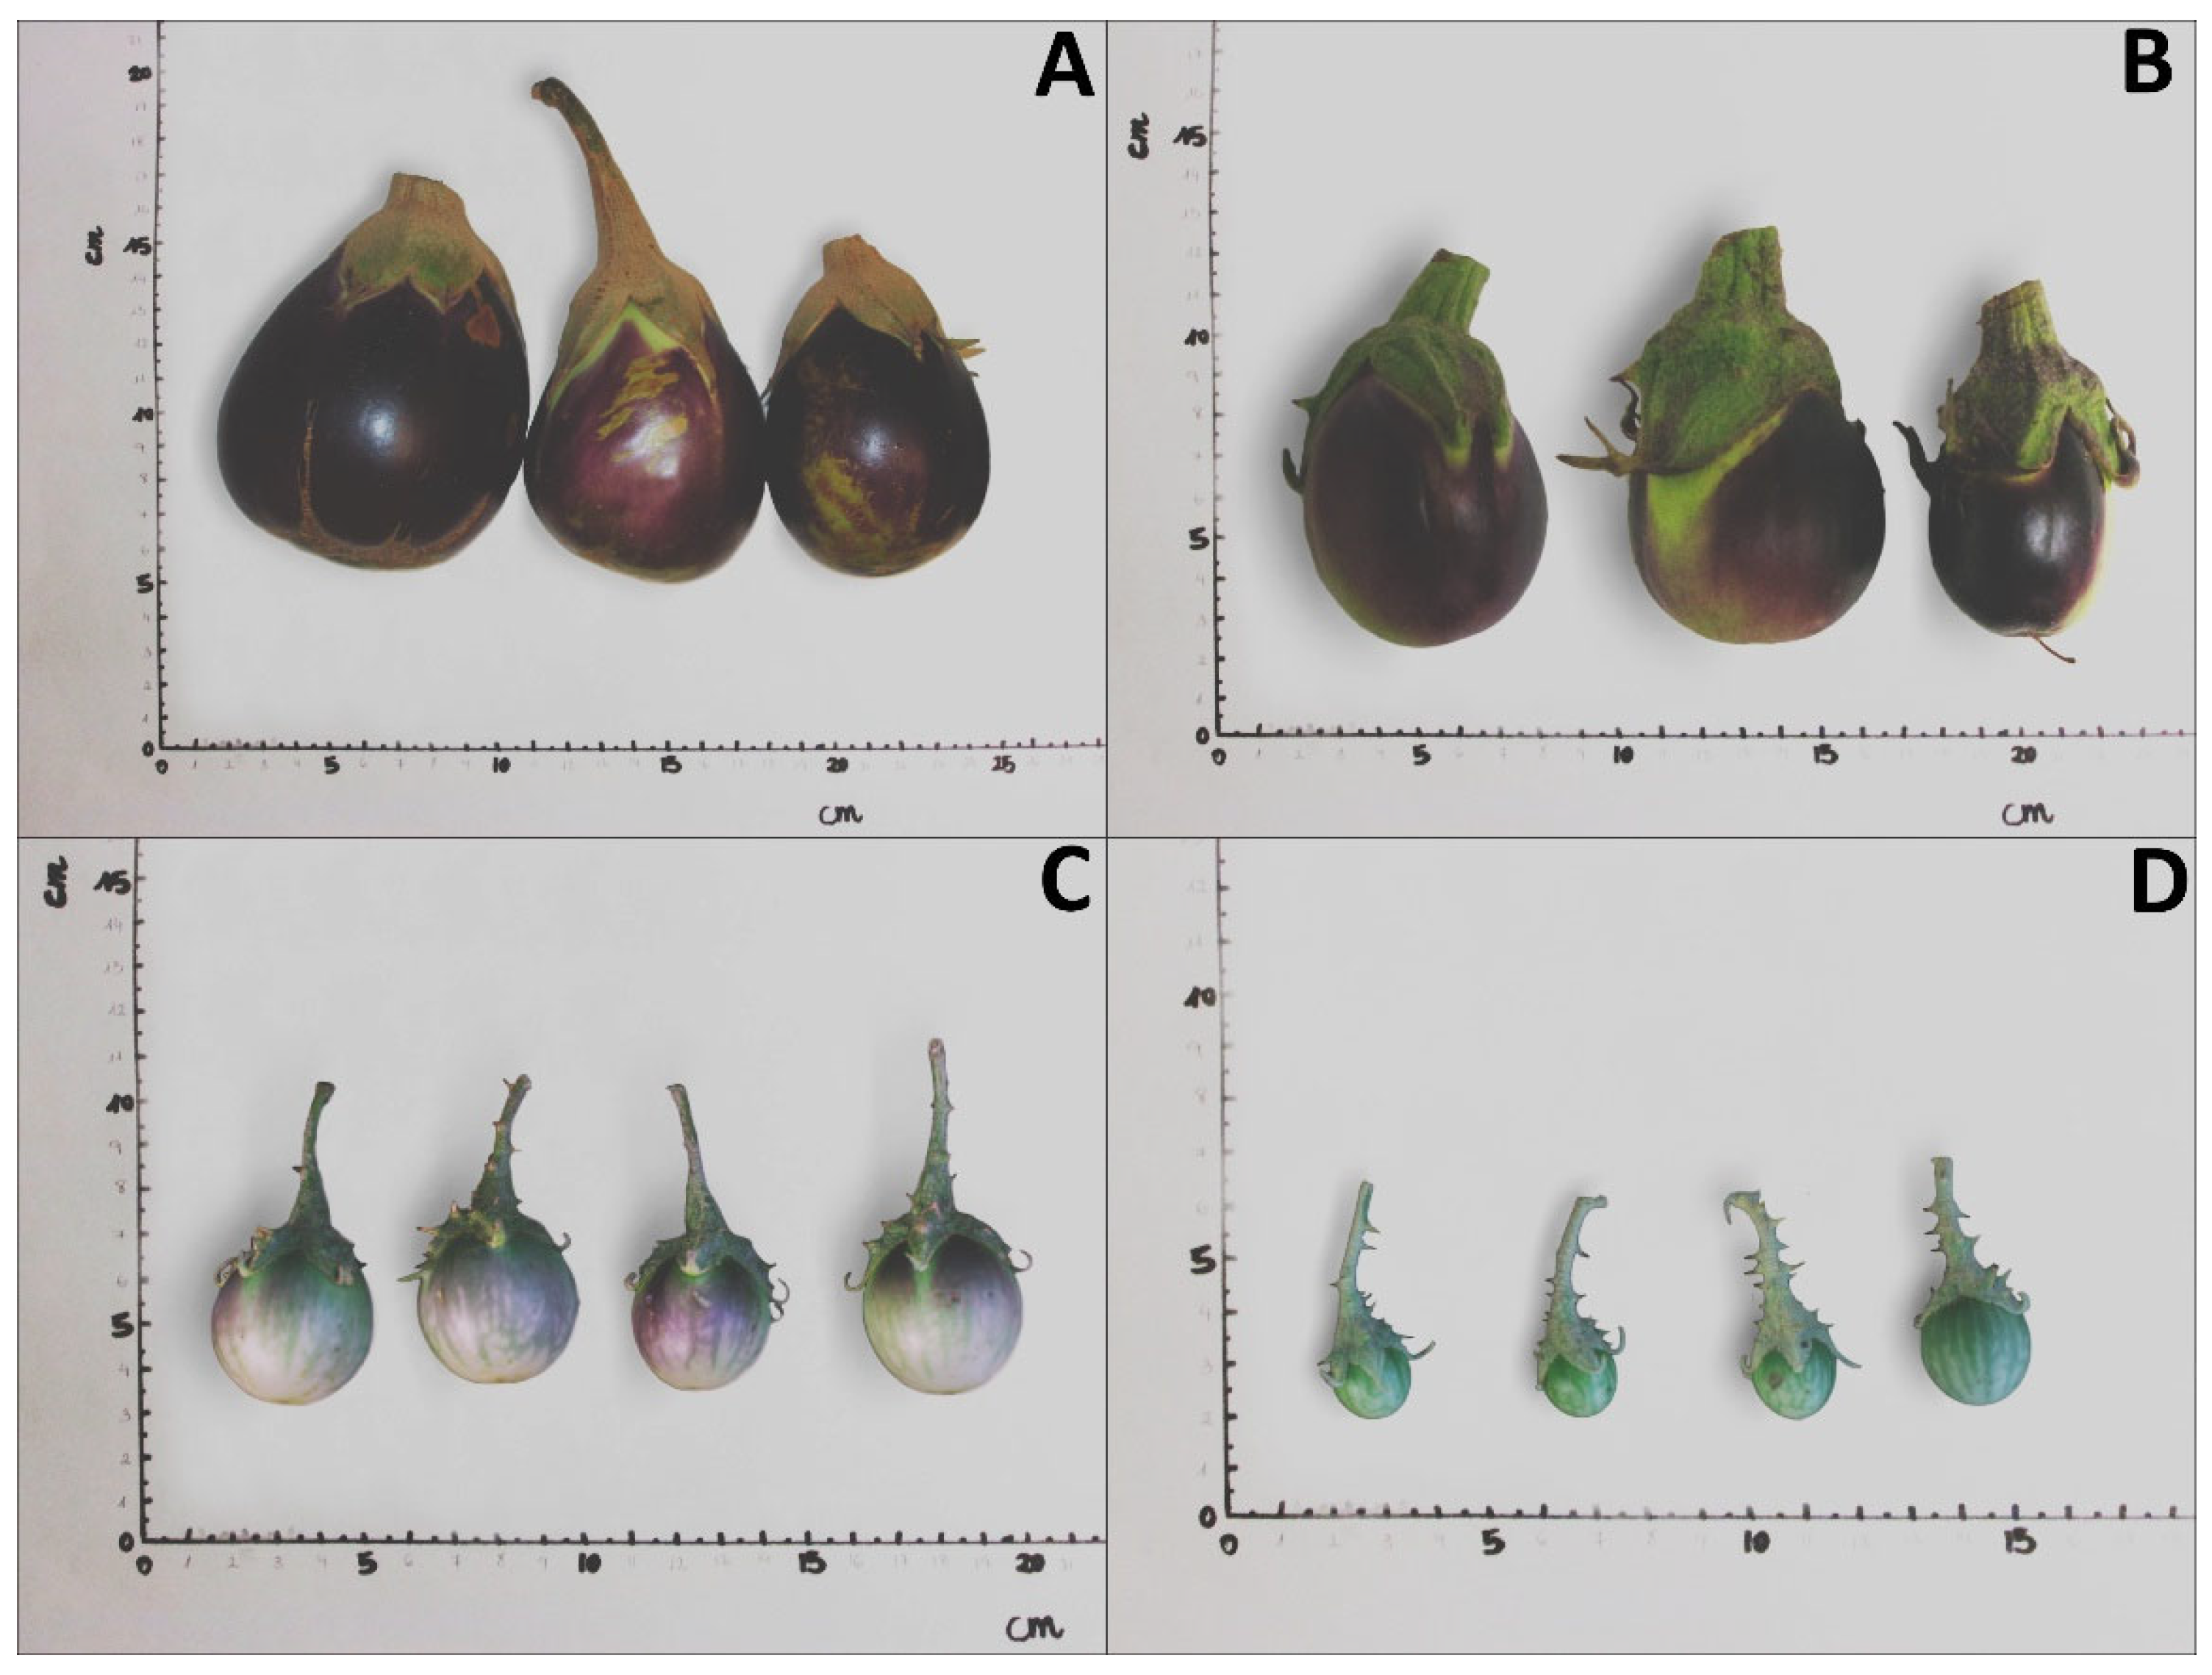 Diversity among accessions of scarlet eggplant complex (S. aethiopicum